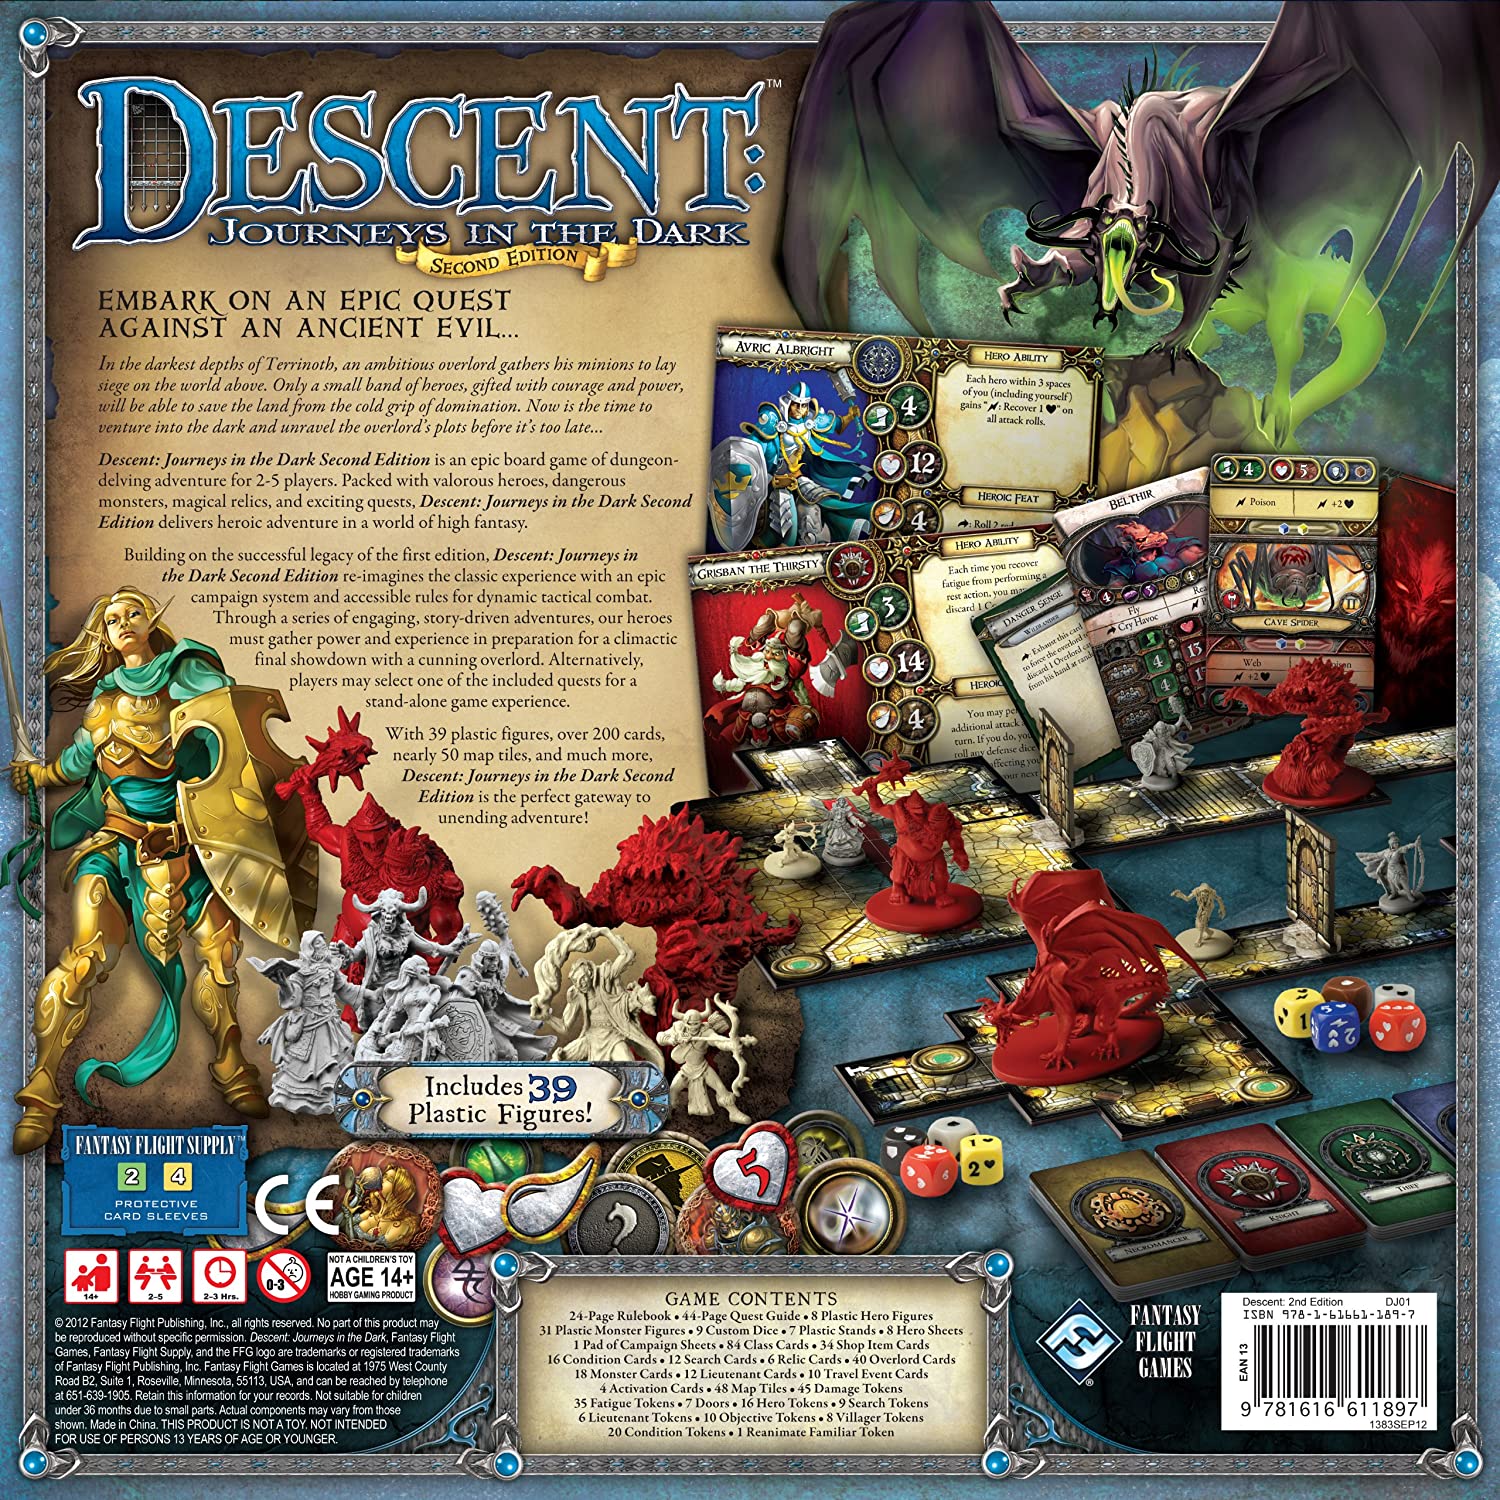 Find out about Descent: Journeys in the Dark (Second Edition)